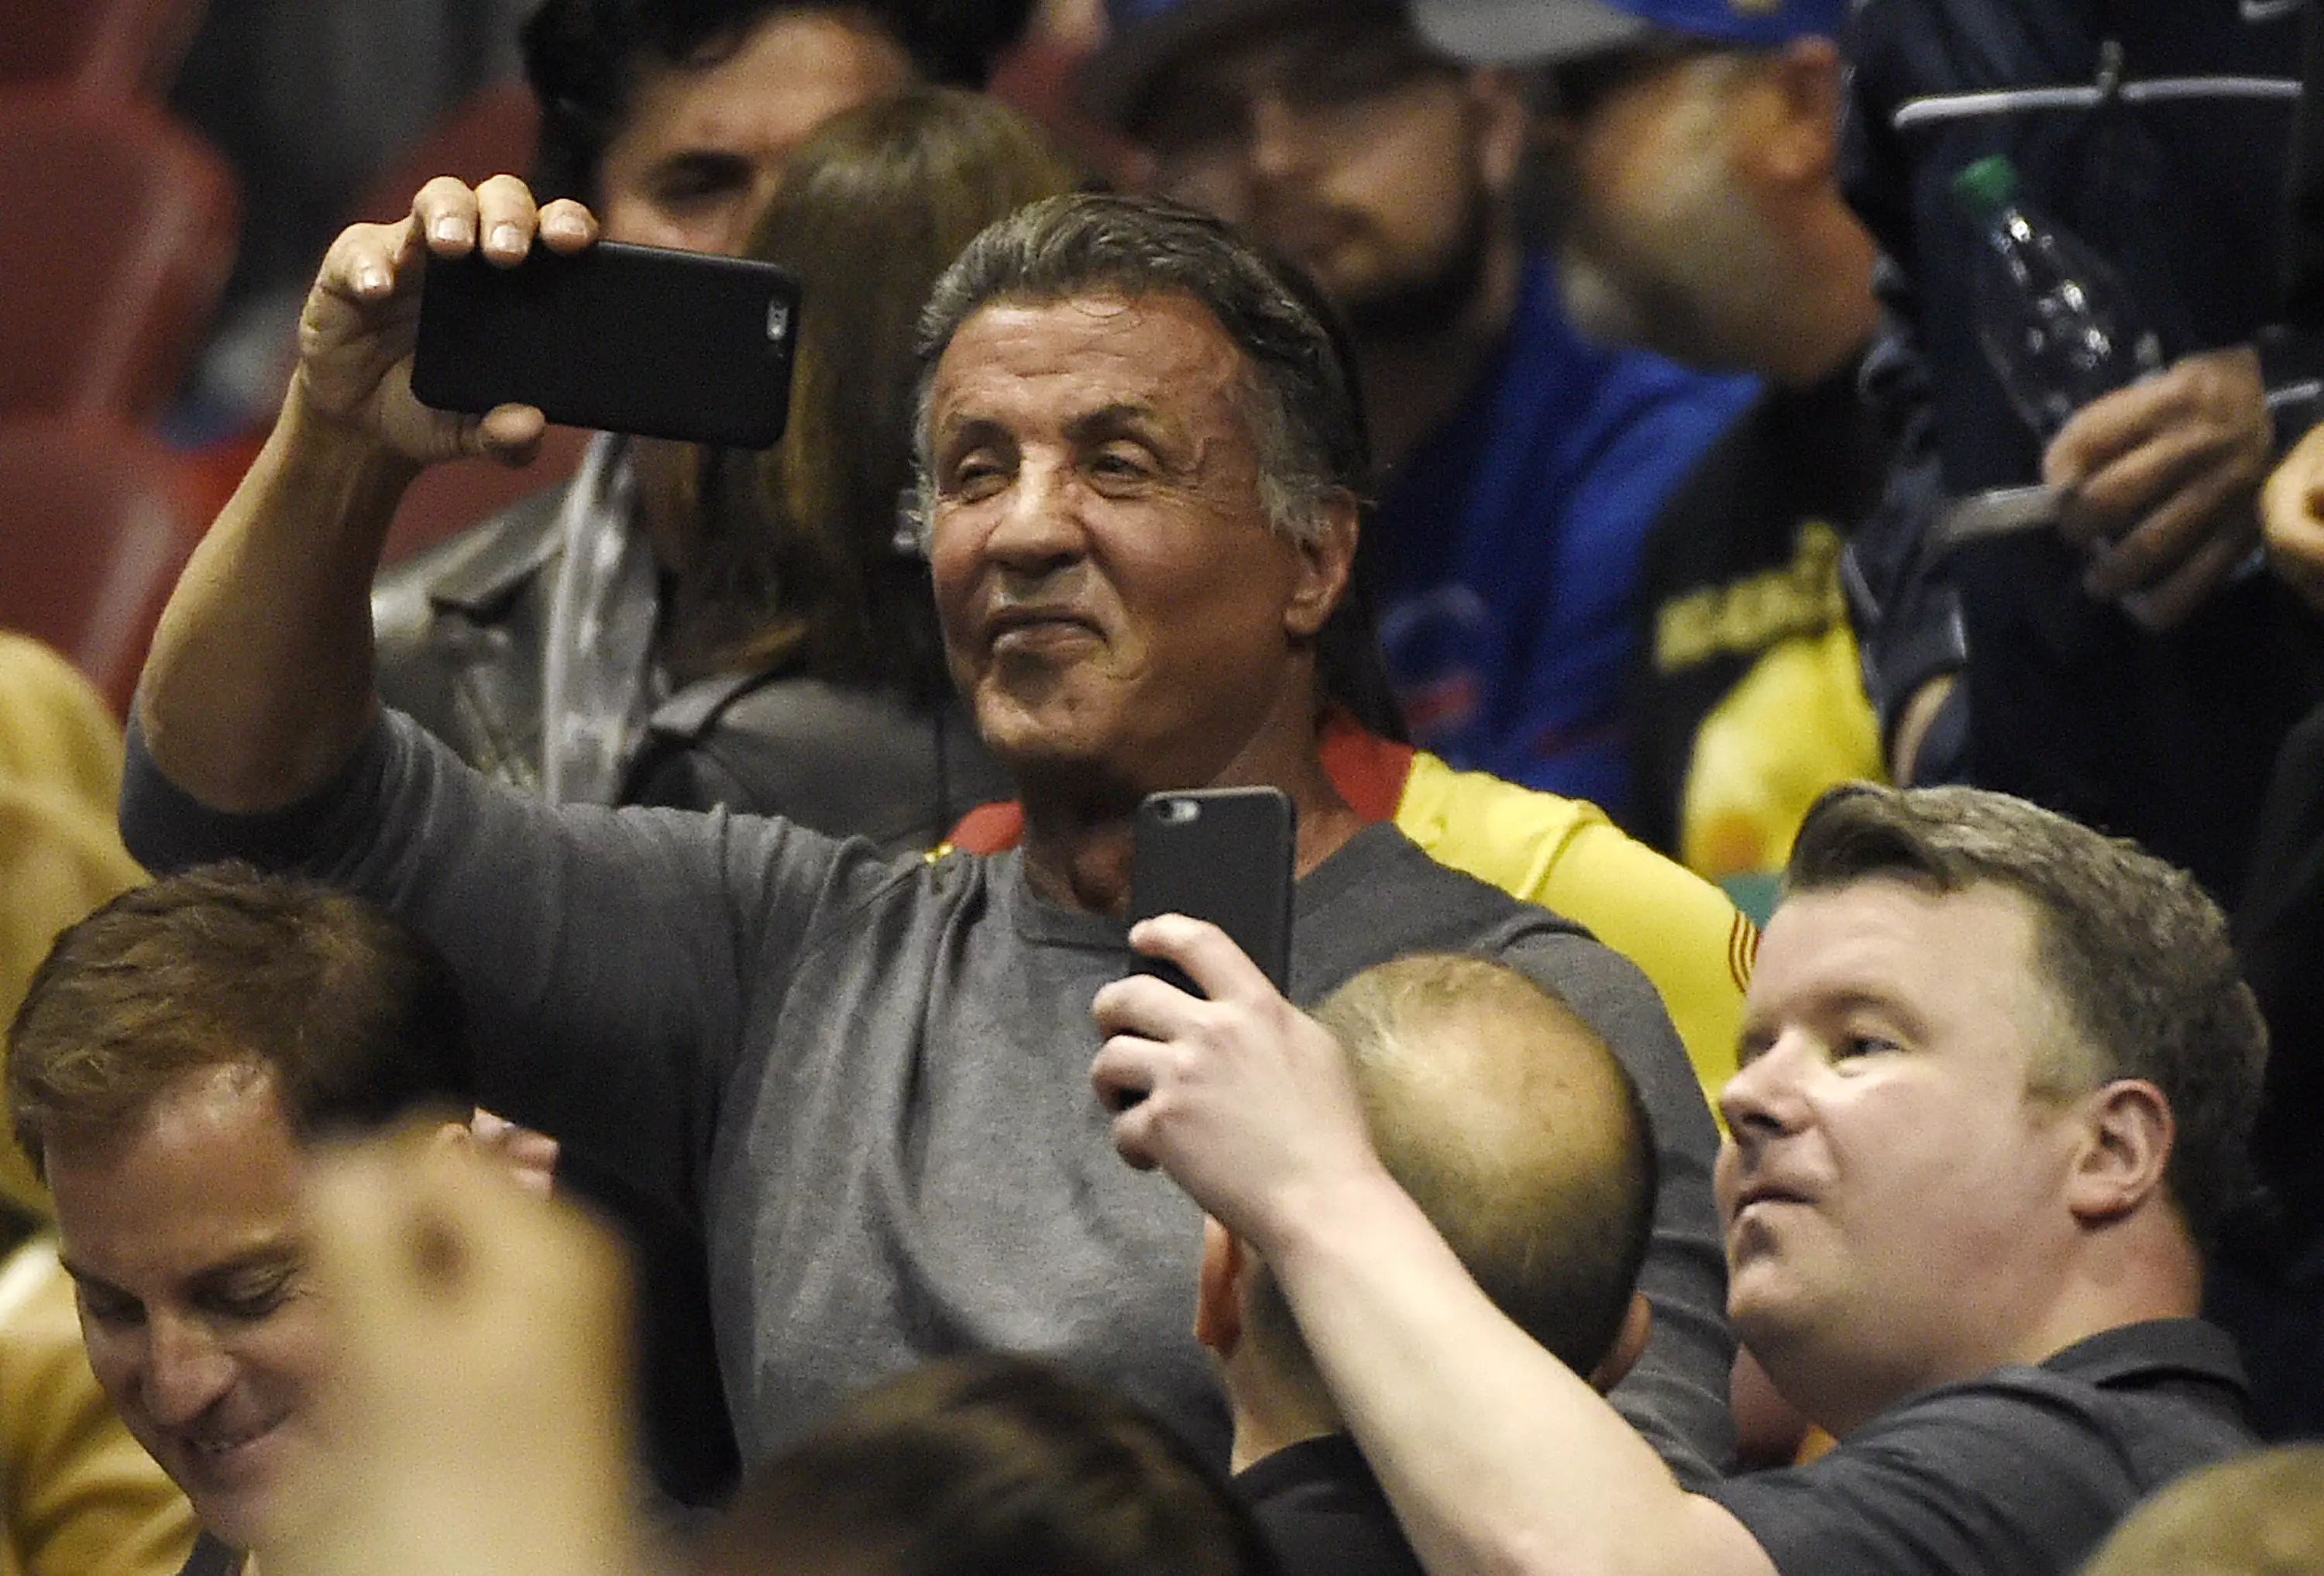 Sylvester Stallone Is All Well After Horrible Hoax Going Round That He's Dead